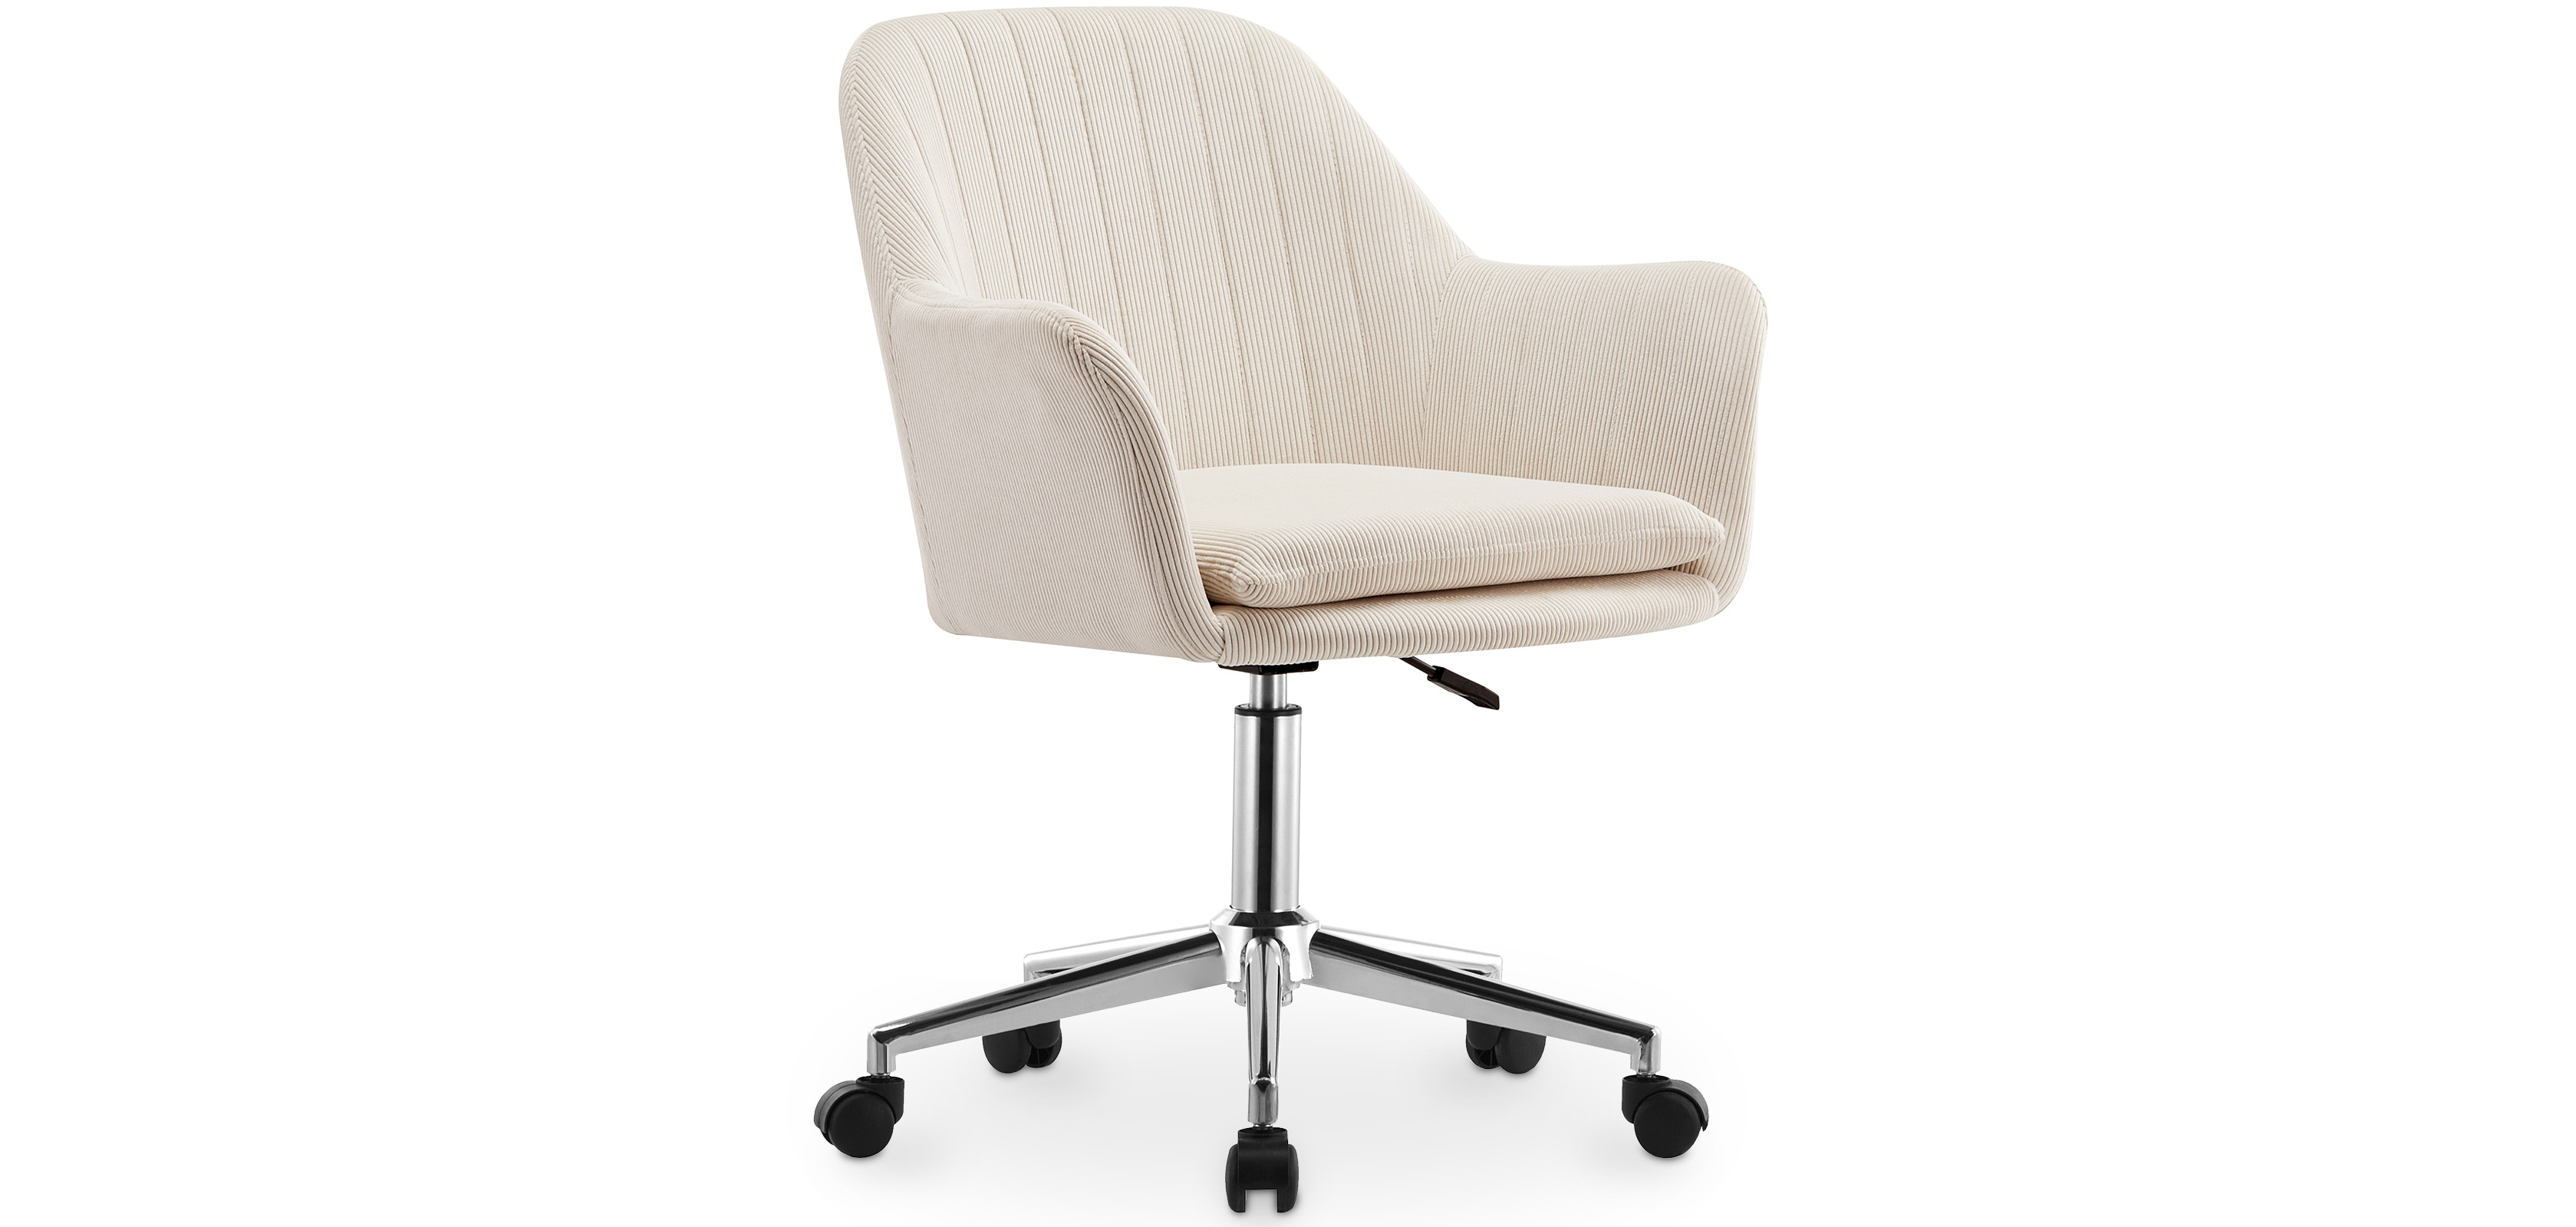 Swivel Office Chair with Armrests - Venia